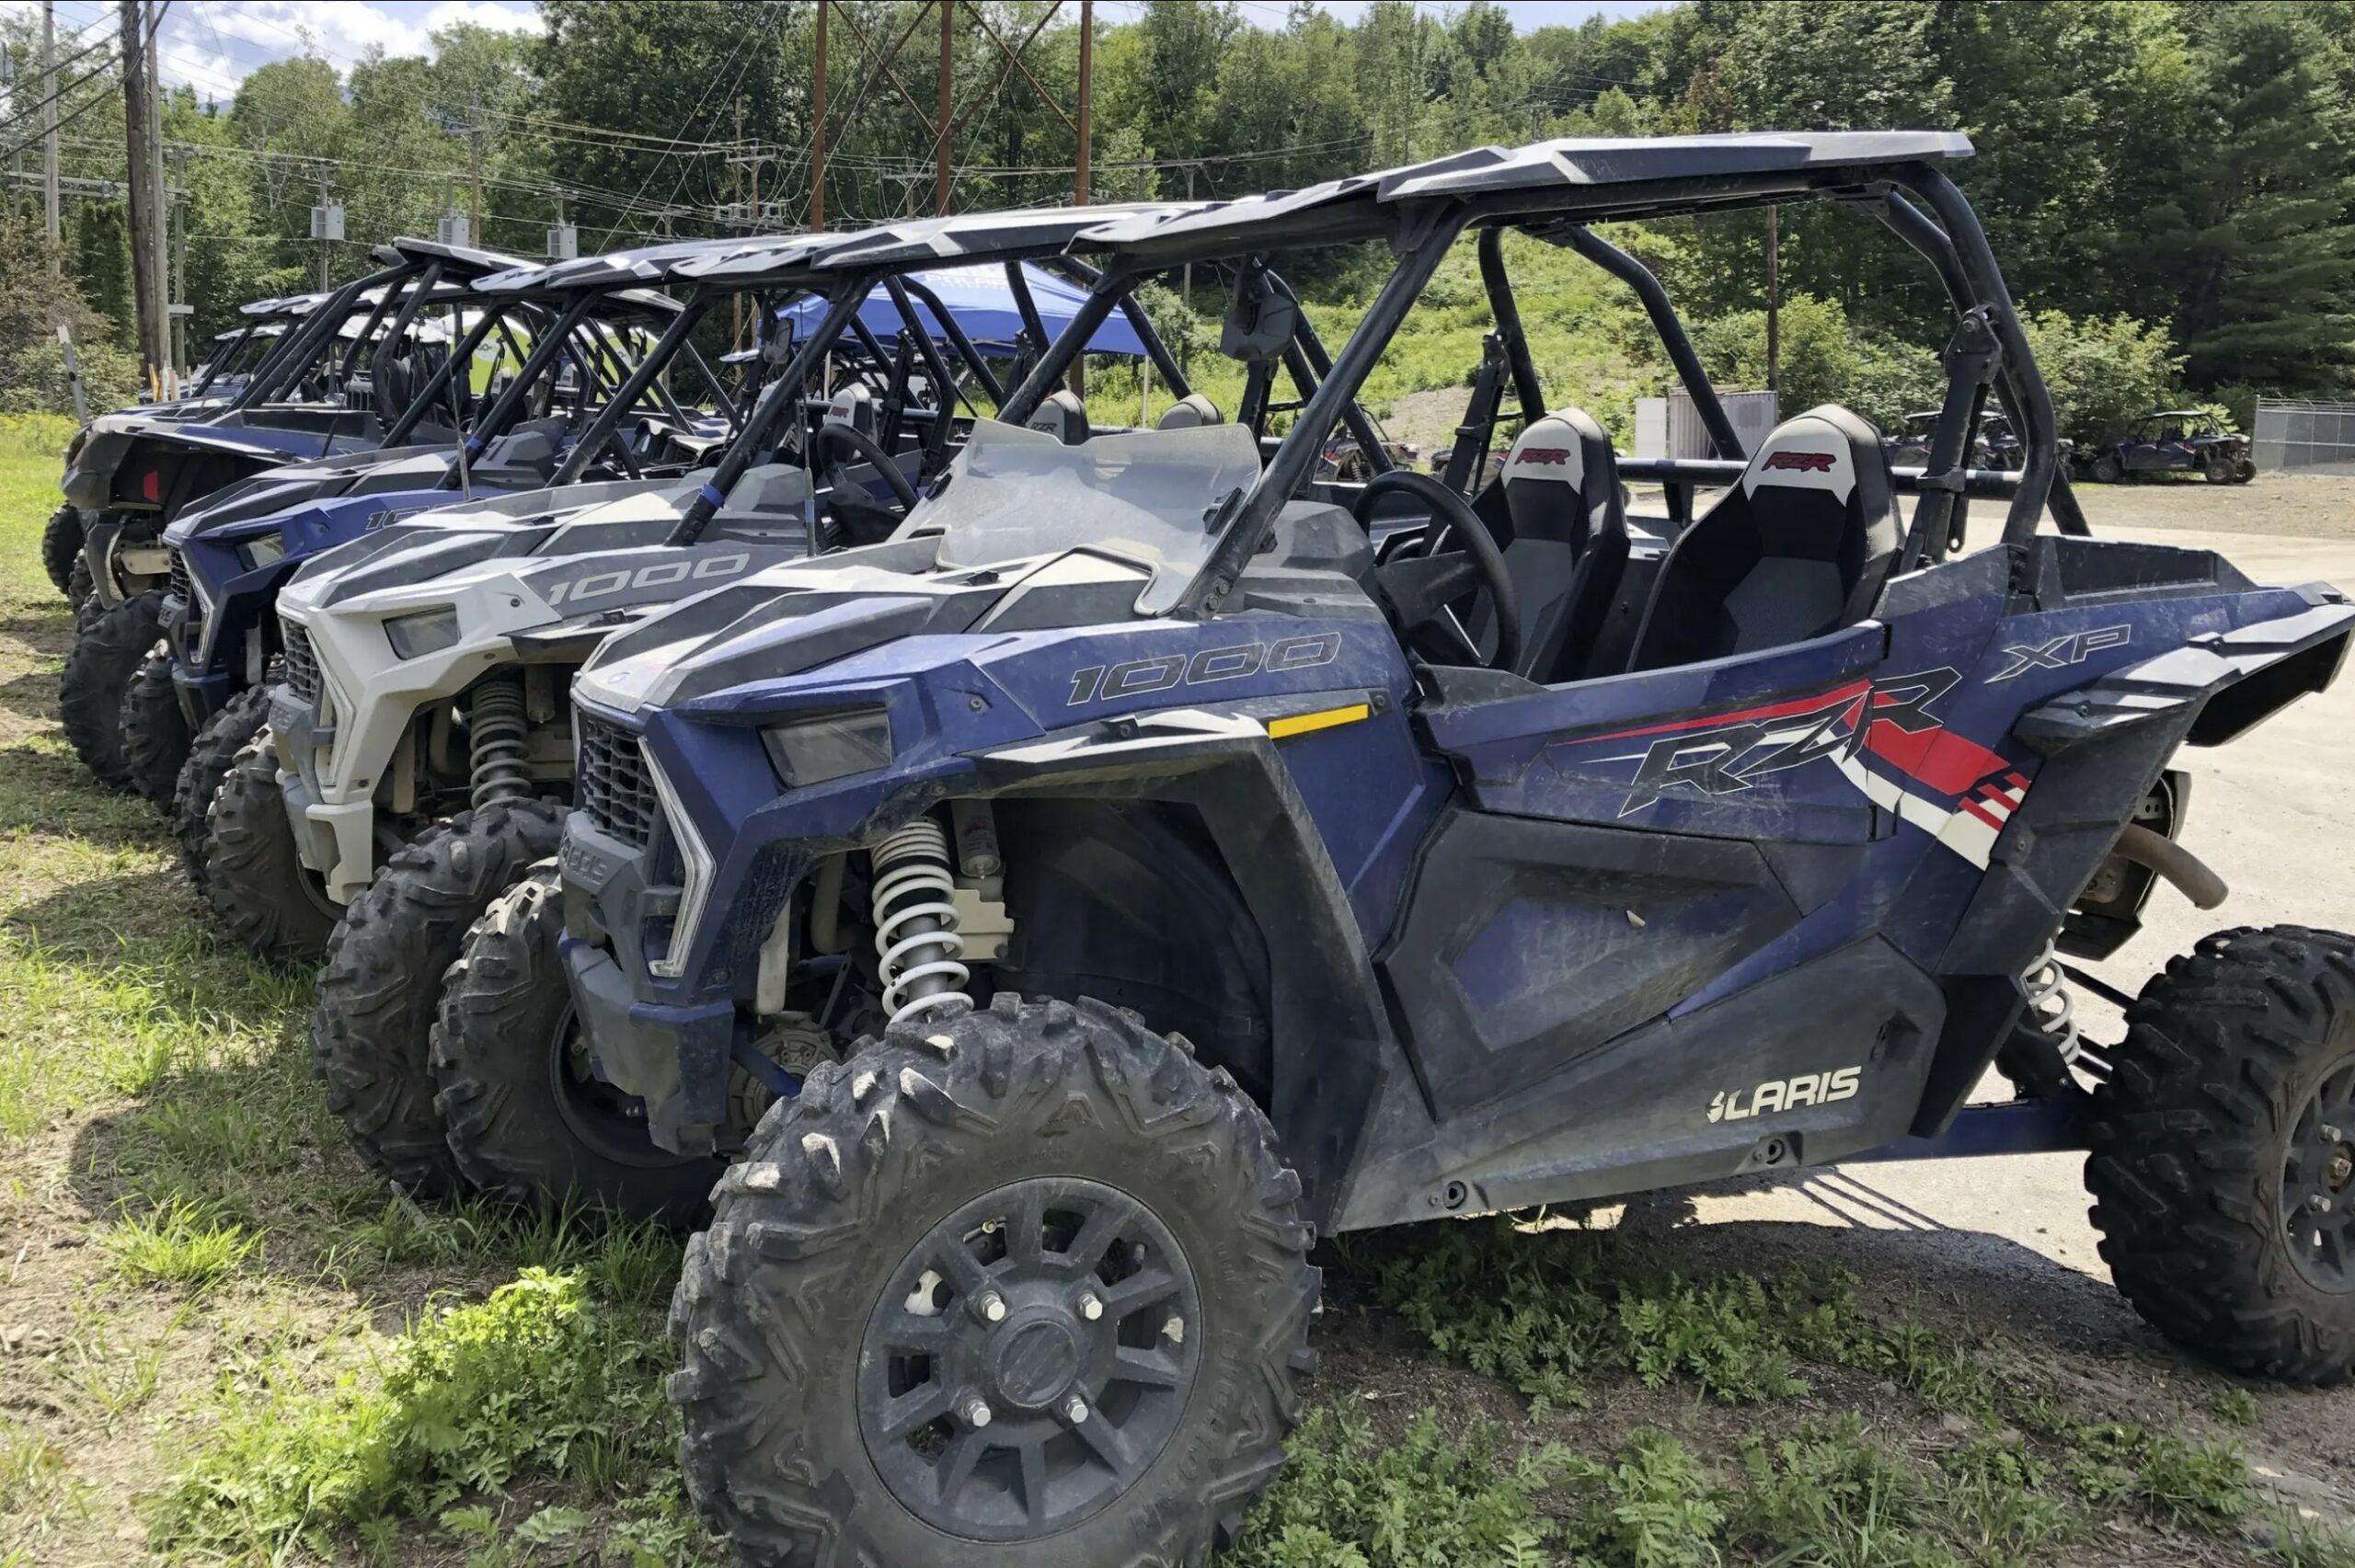   
																Off-road: Bill would ban UTVs from high-speed highways, require licenses and insurance 
															 